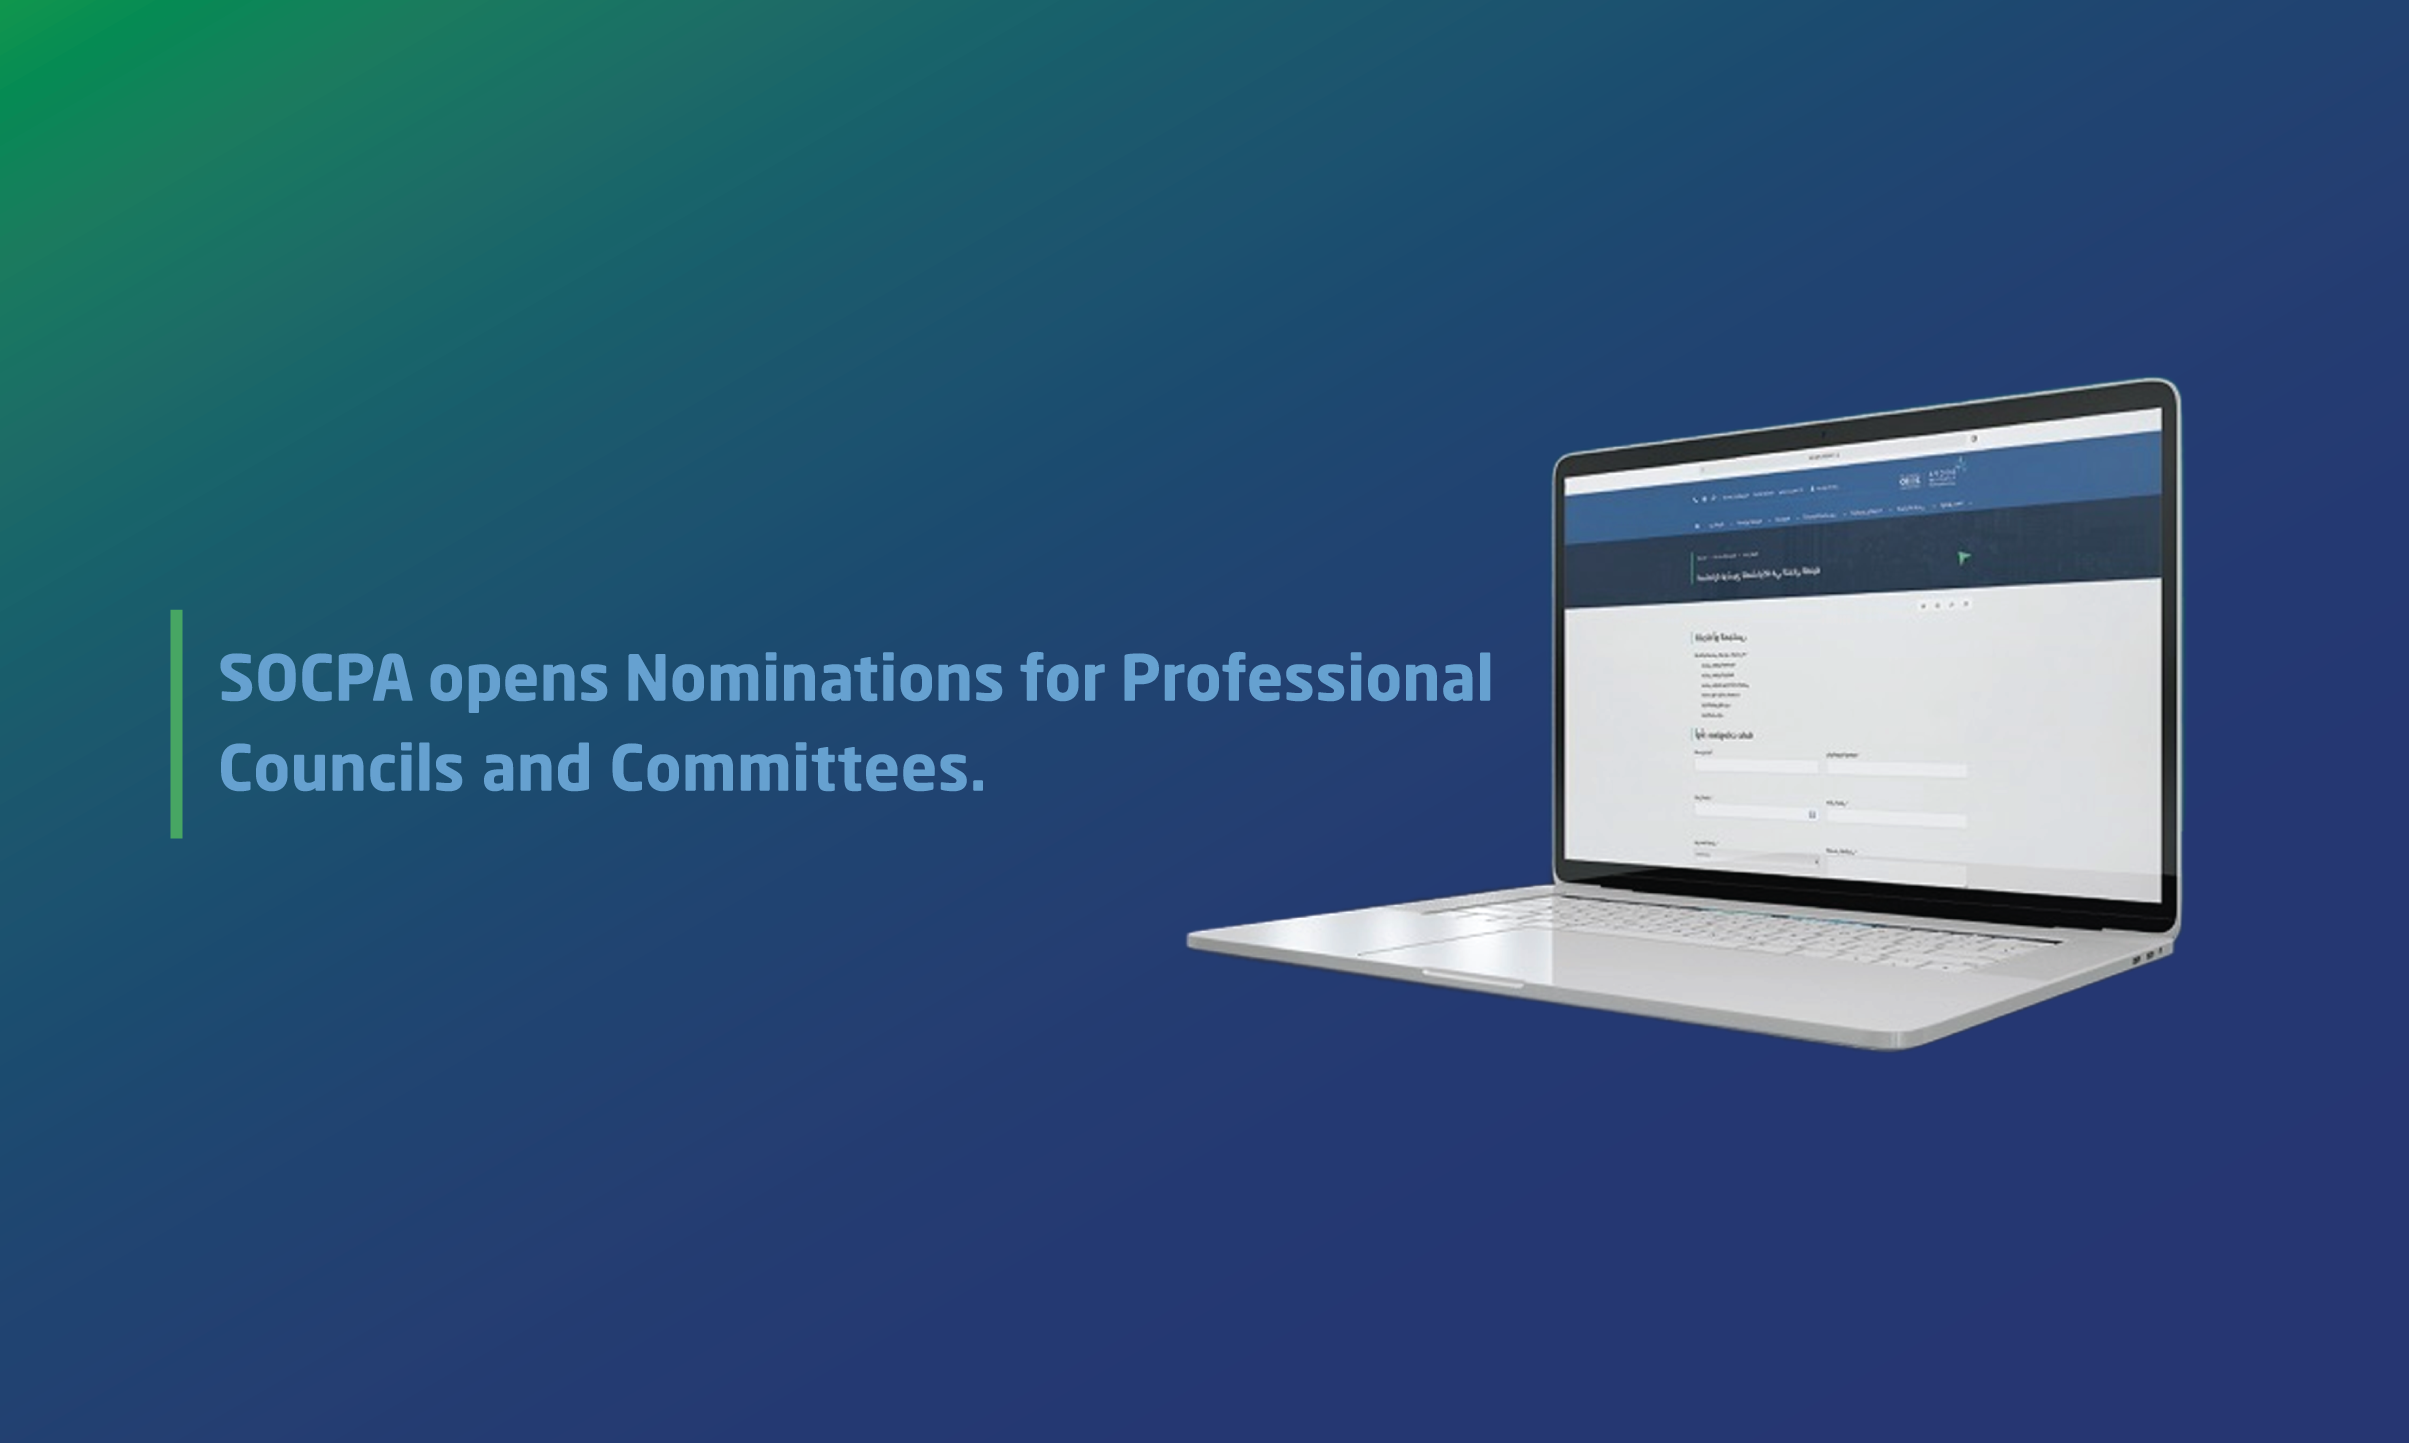 SOCPA opens Nominations for Professional Councils and Committees